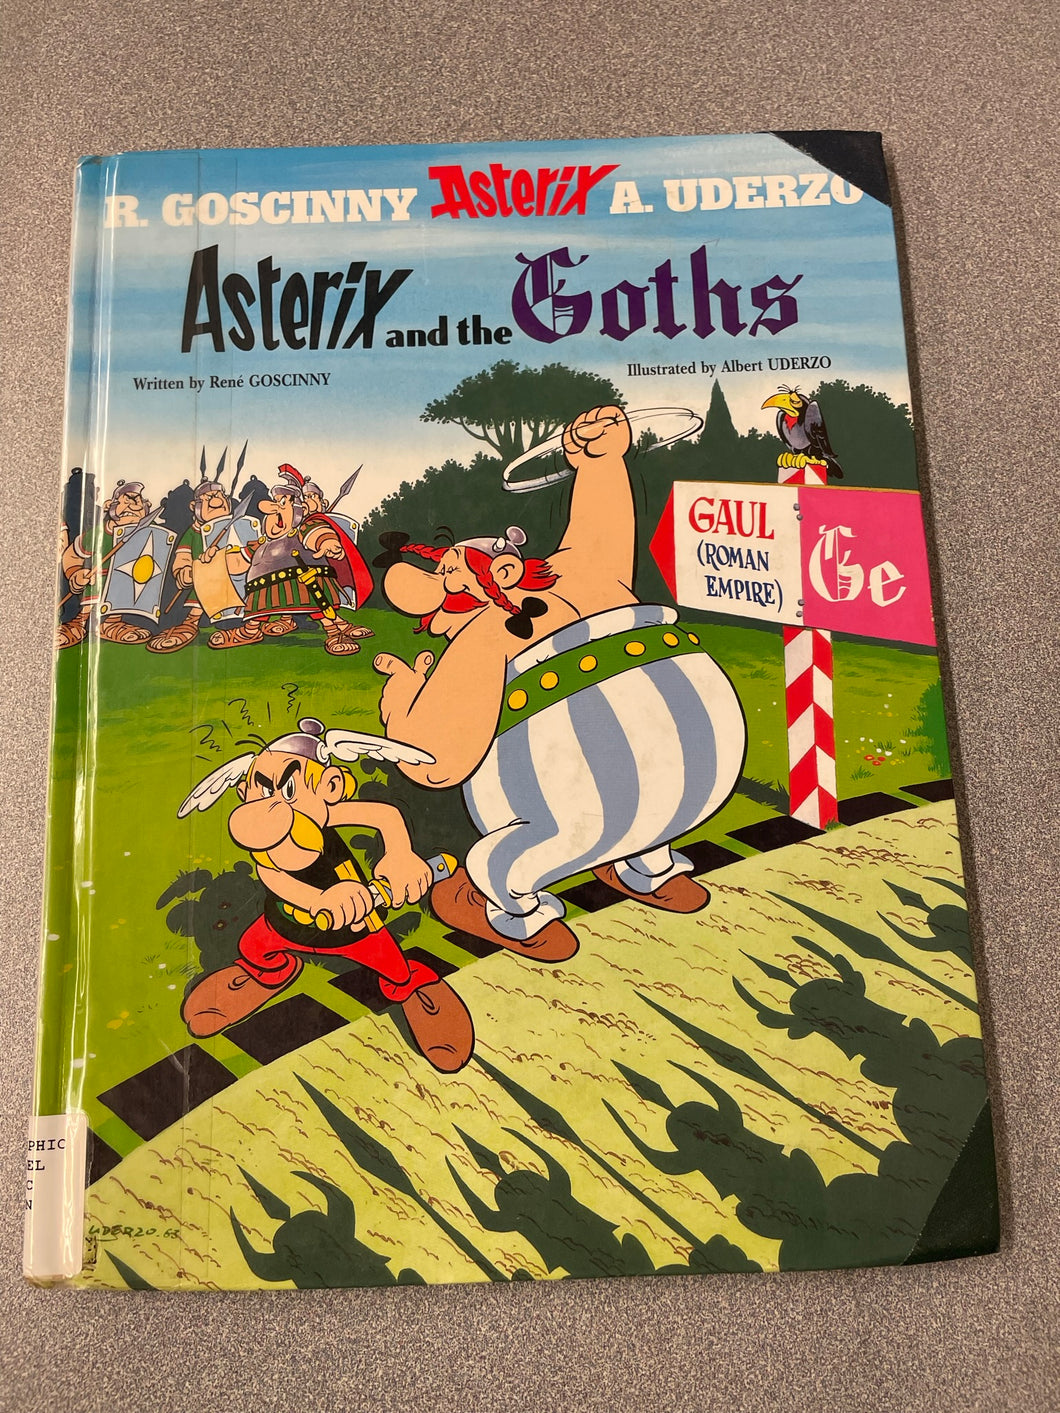 Asterix and the Goths, Rene Goscinny and Albert Uderzo 1963 GN